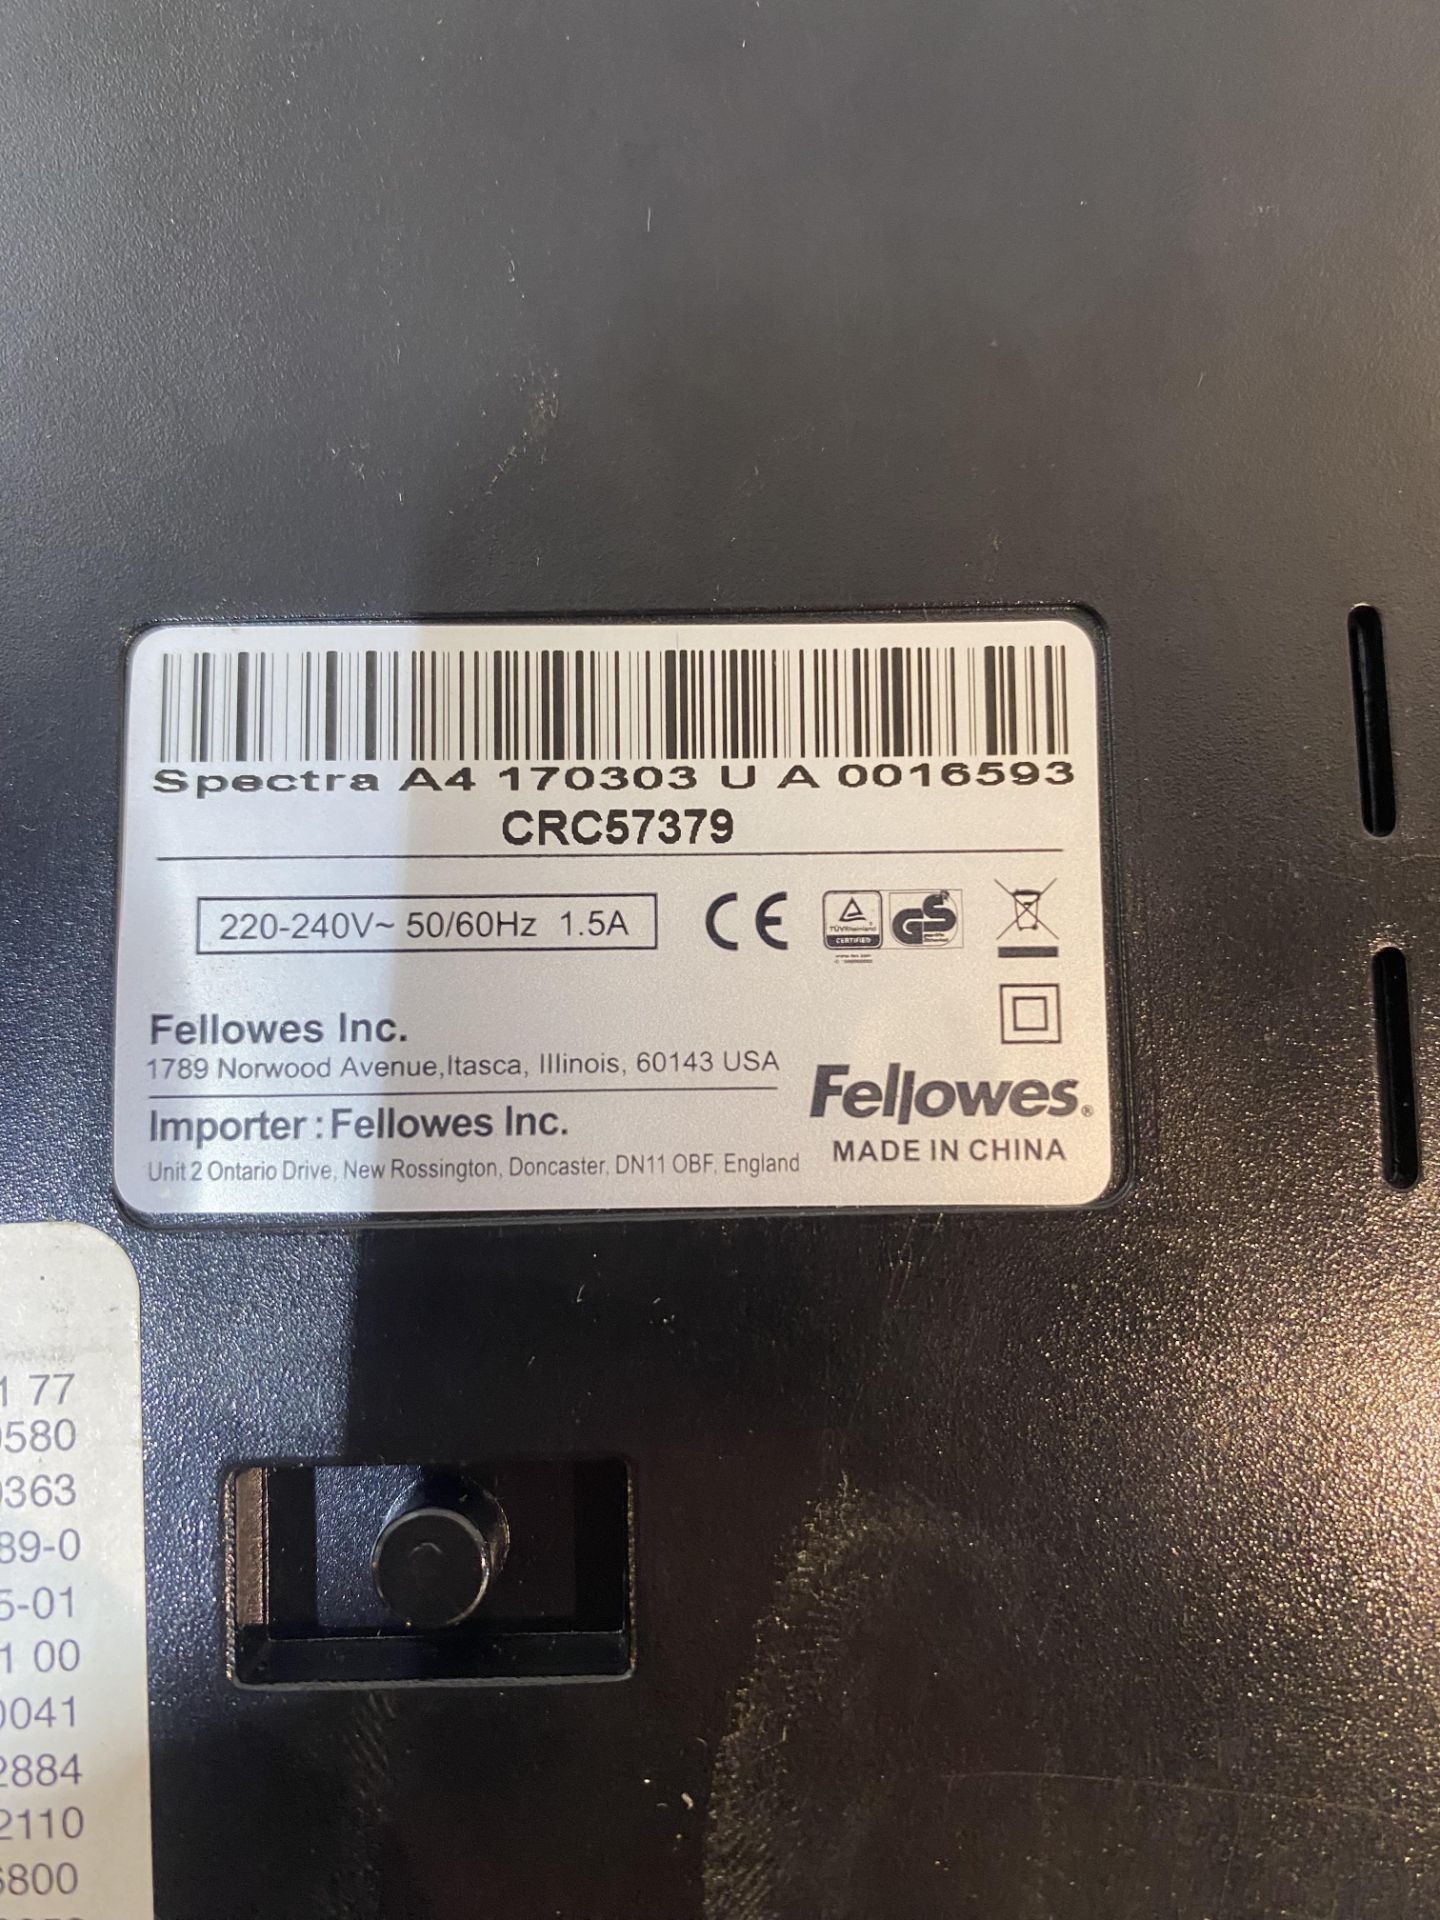 Fellowes Spectra CRC57379 A4 Laminator - Image 5 of 5